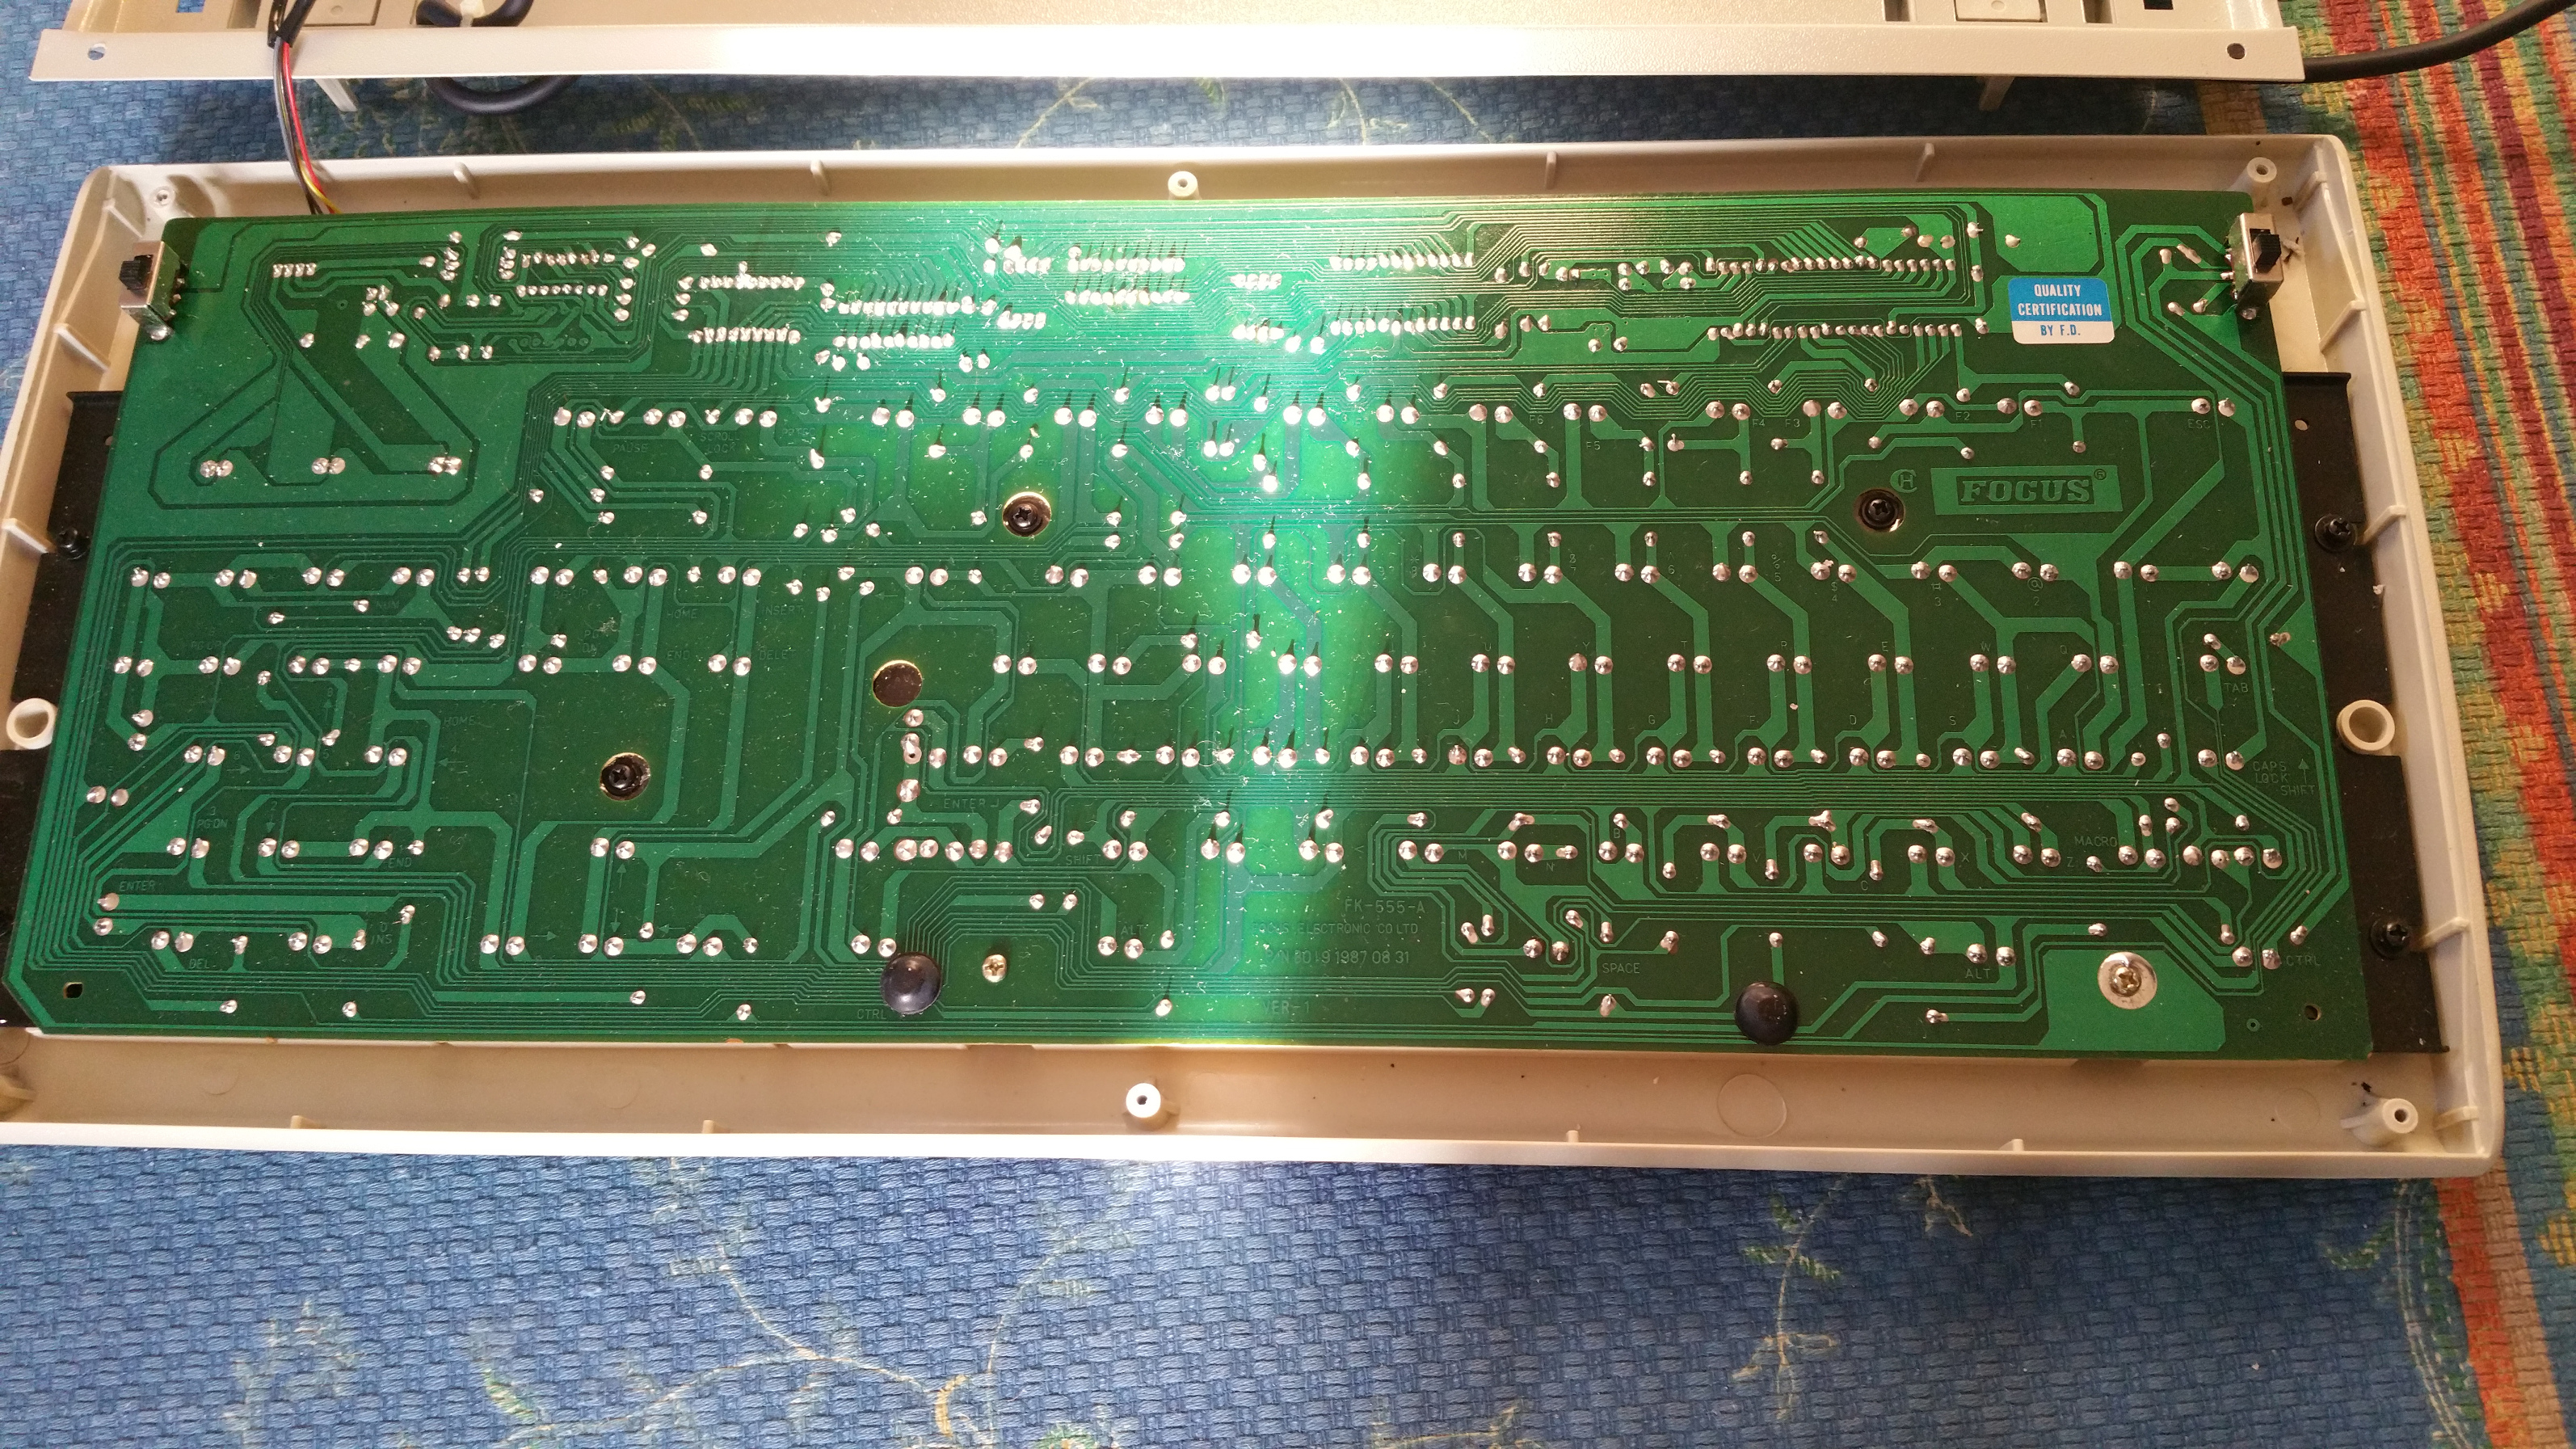 all switches are labeled on the pcb